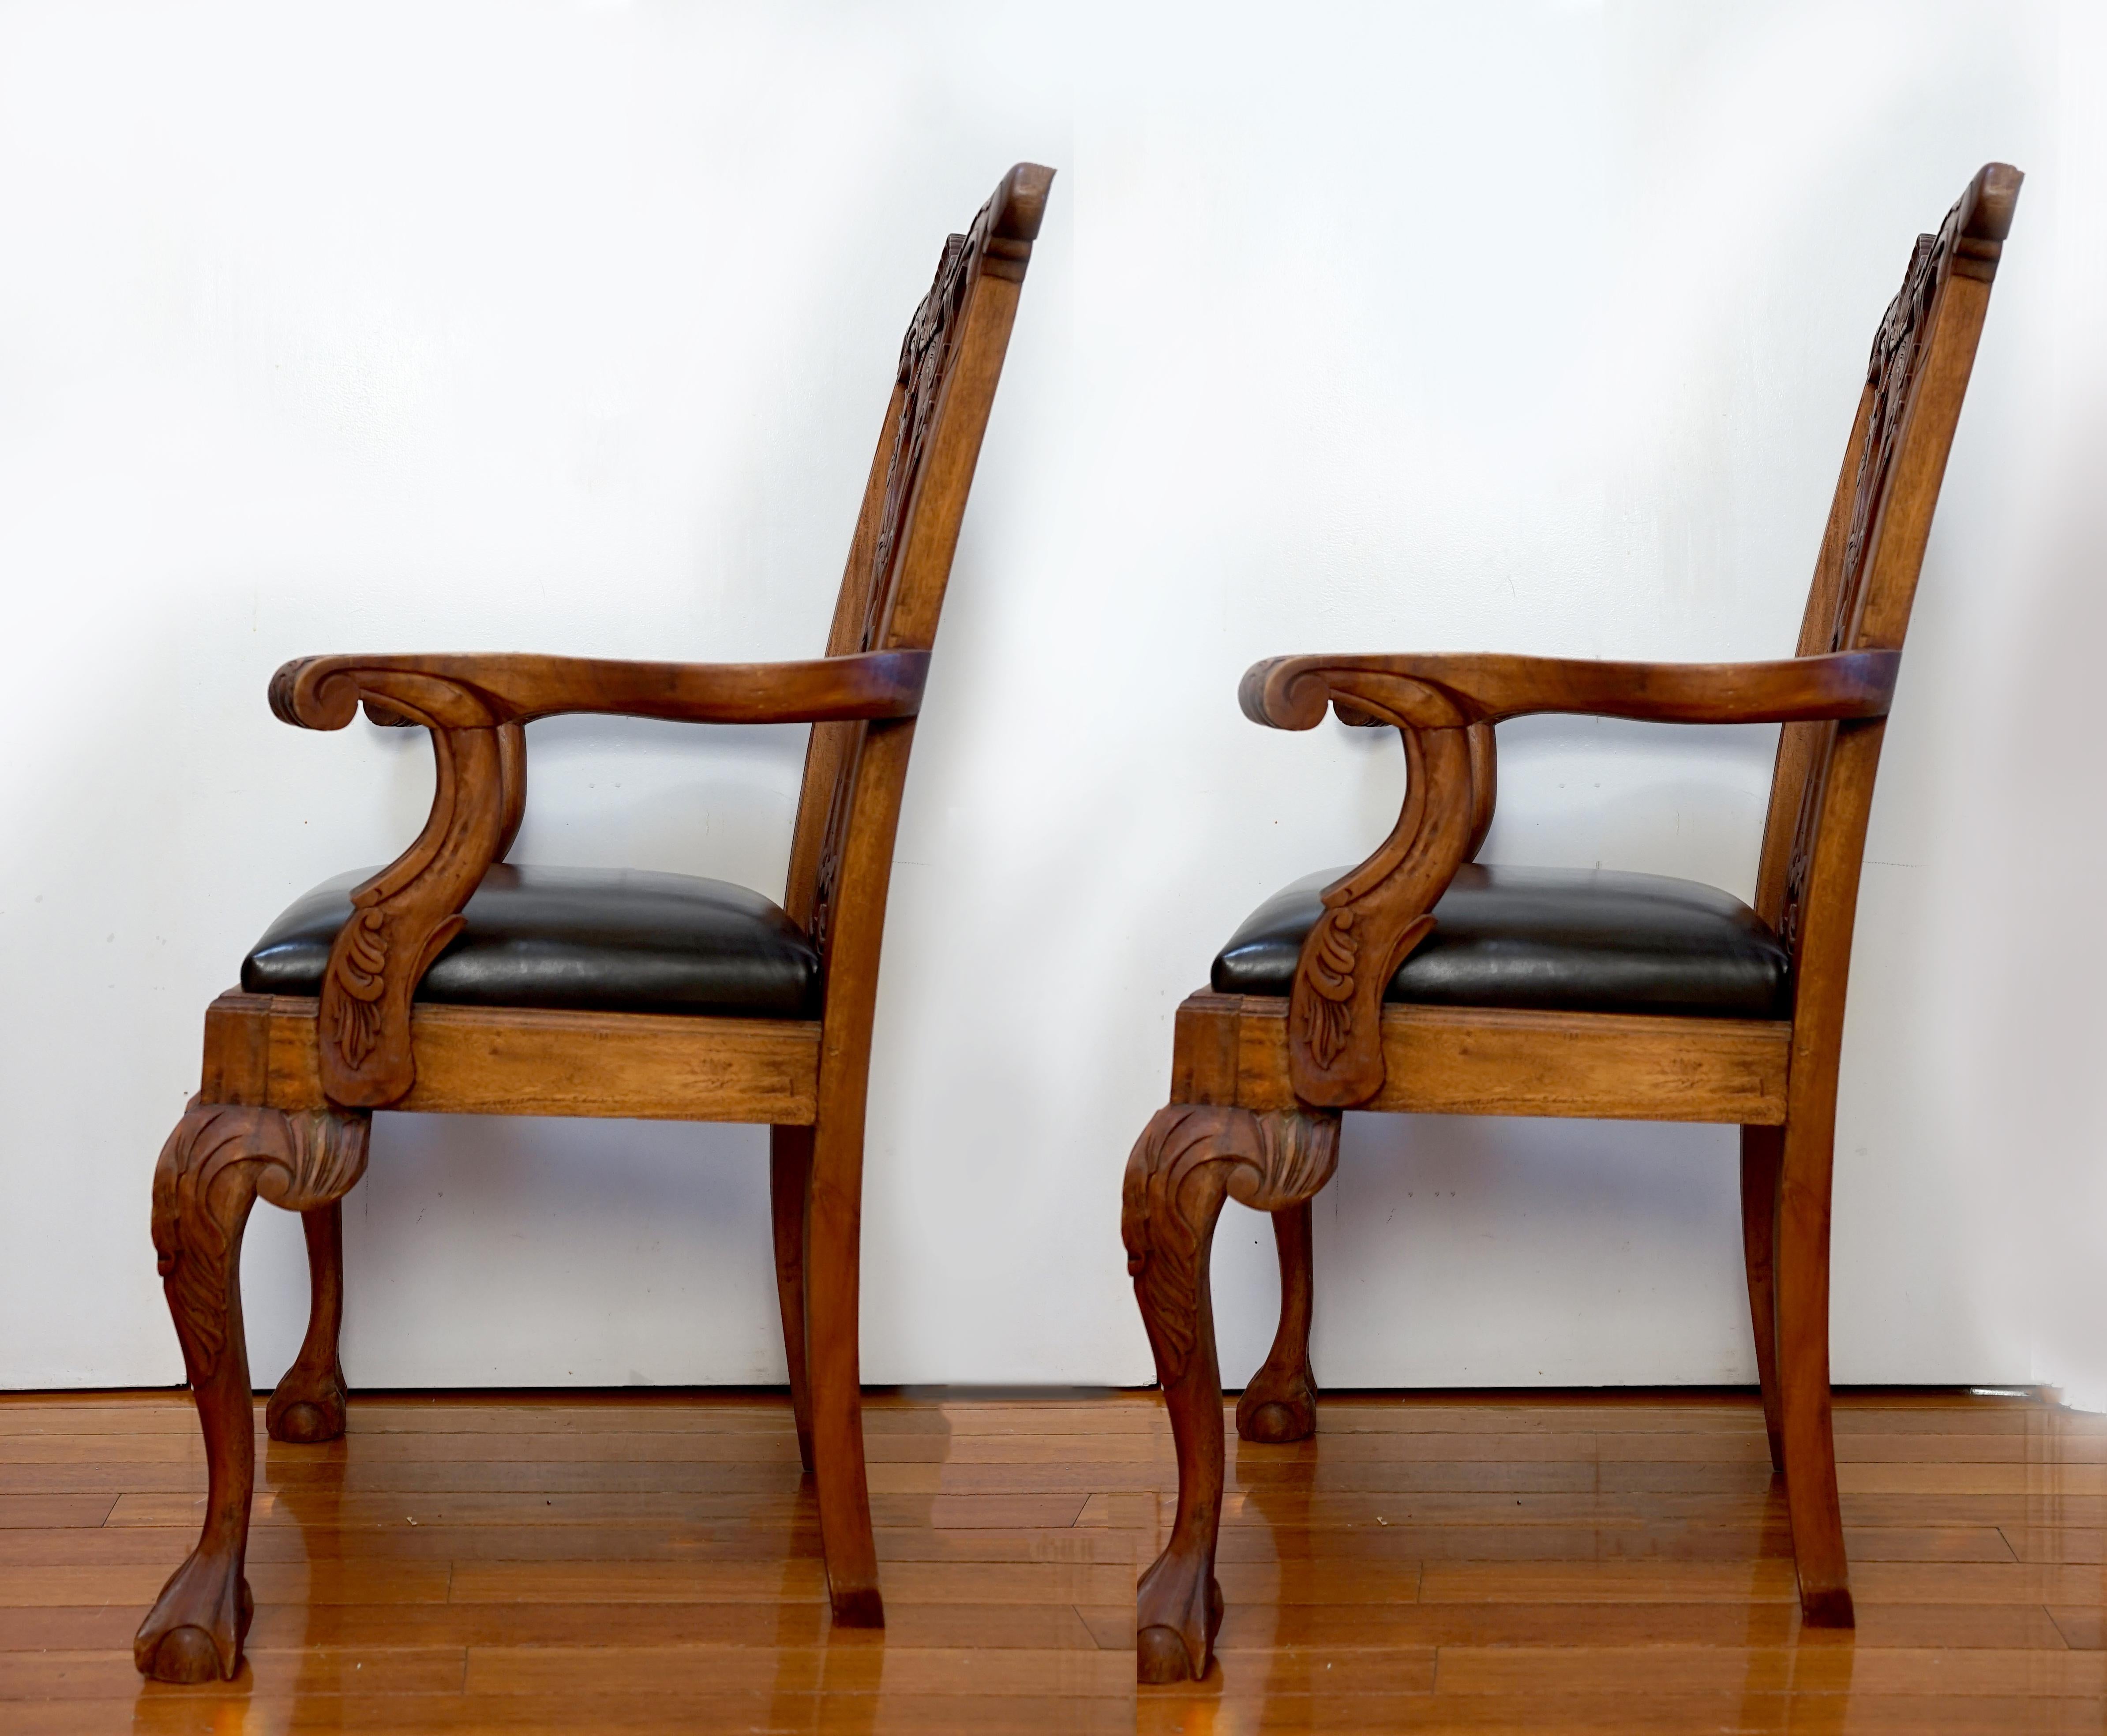 The tone of the stain and the manner in which it complements the mahogany, causes this pair of George III Chippendale armchairs to stand out. The chairs are circa 1920, and two later than the first quarter of the 20th century. The hand carving just